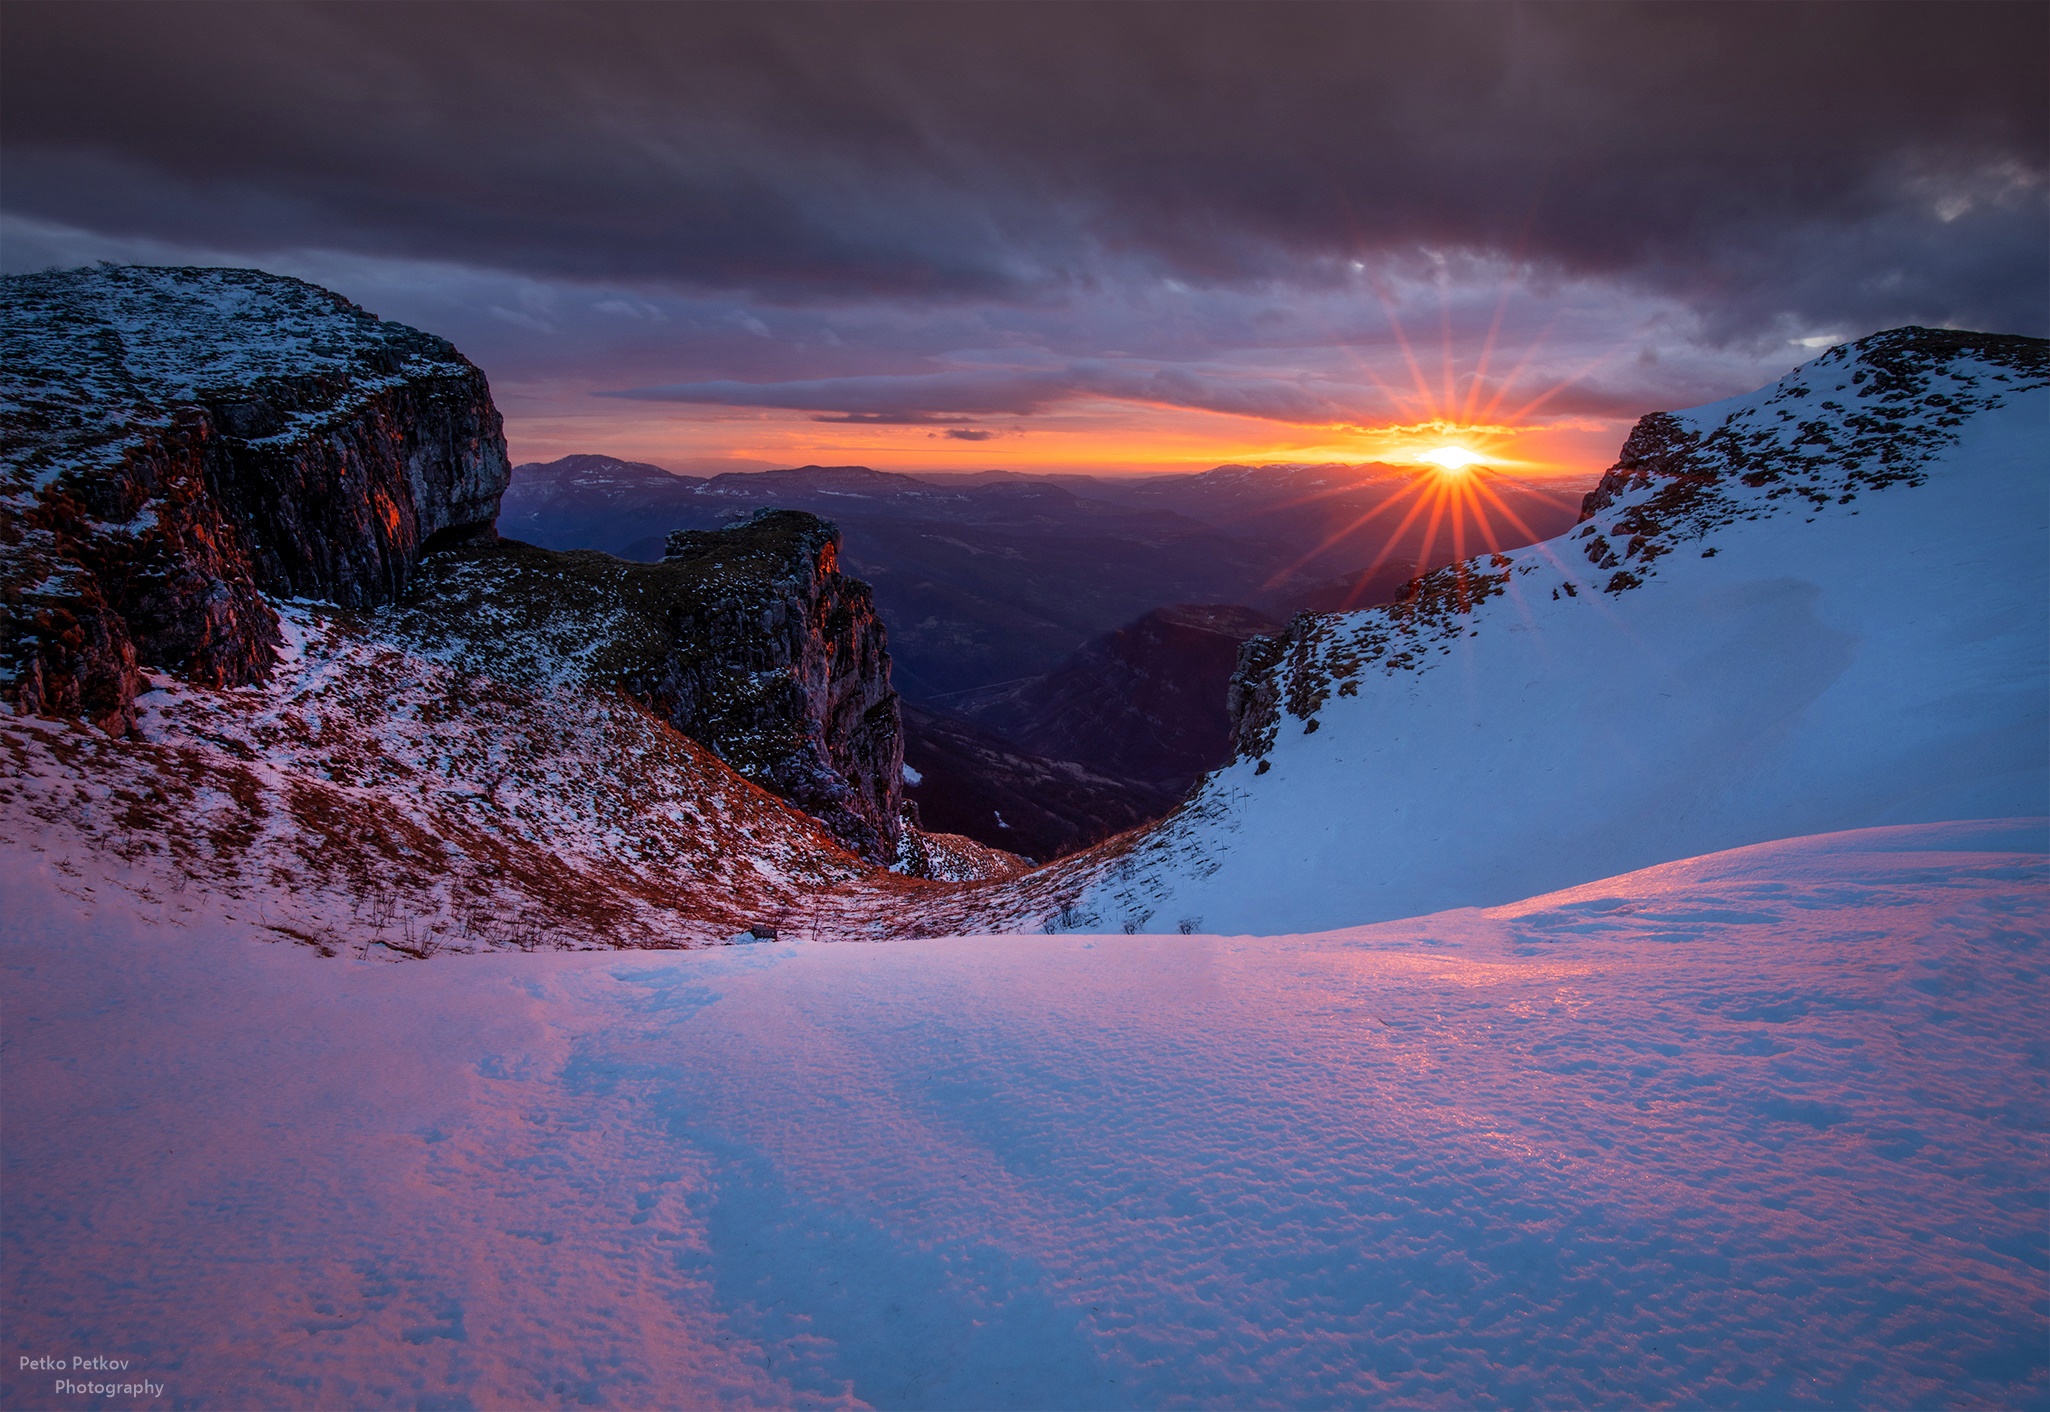 Nature Landscape Winter Snow Petko Petkov Sunset Clouds Valley Rocks Mountains Mountain Top 2050x1412